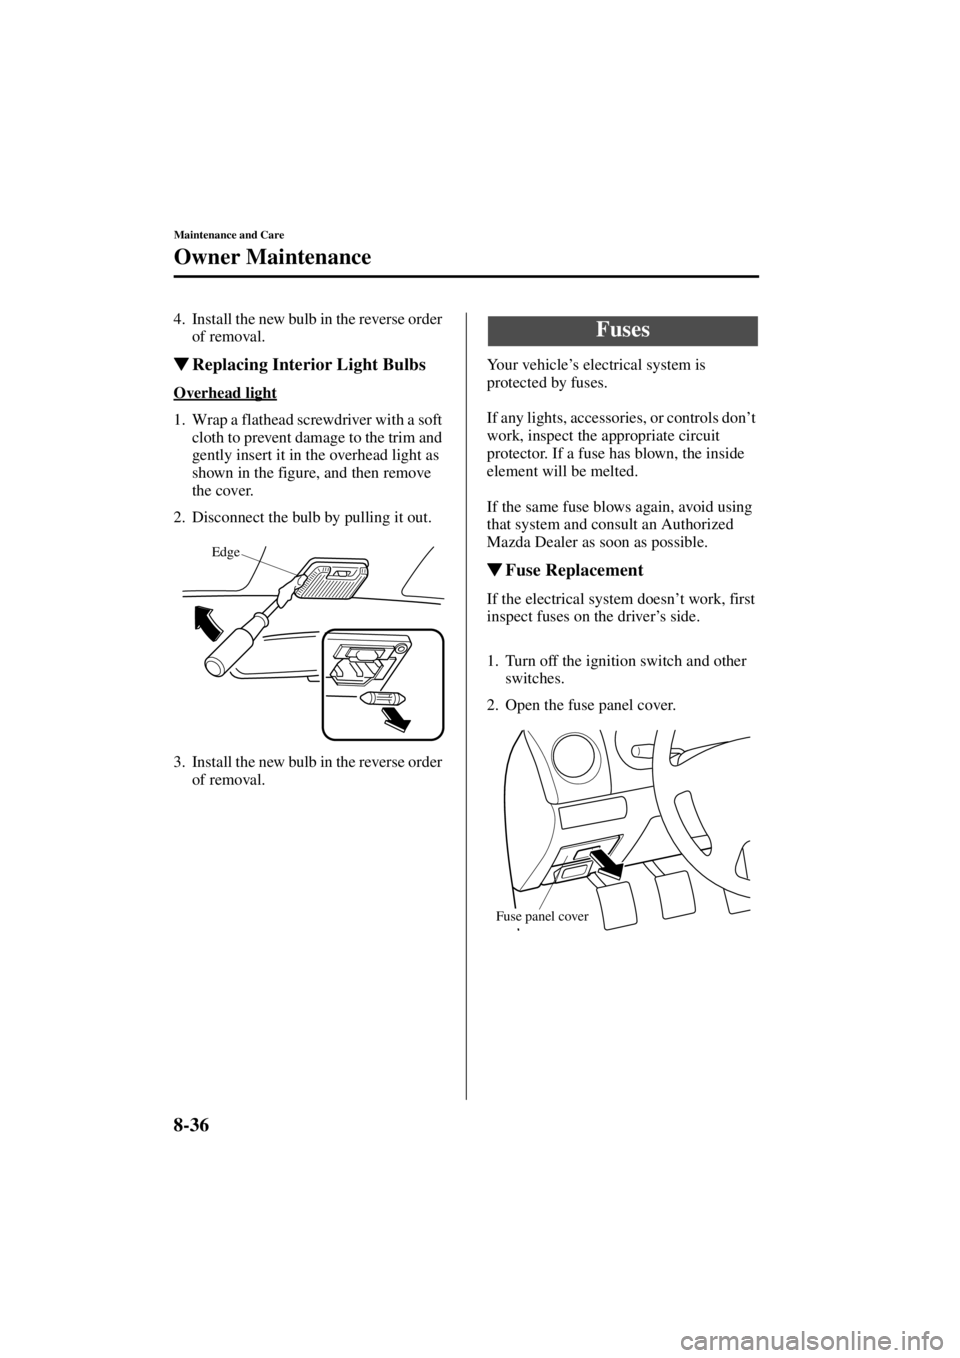 MAZDA MODEL SPEED MX-5 MIATA 2004  Owners Manual 8-36
Maintenance and Care
Owner Maintenance
Form No. 8T02-EA-03L
4. Install the new bulb in the reverse order of removal.
Replacing Interior Light Bulbs
Overhead light
1. Wrap a flathead screwdriver 